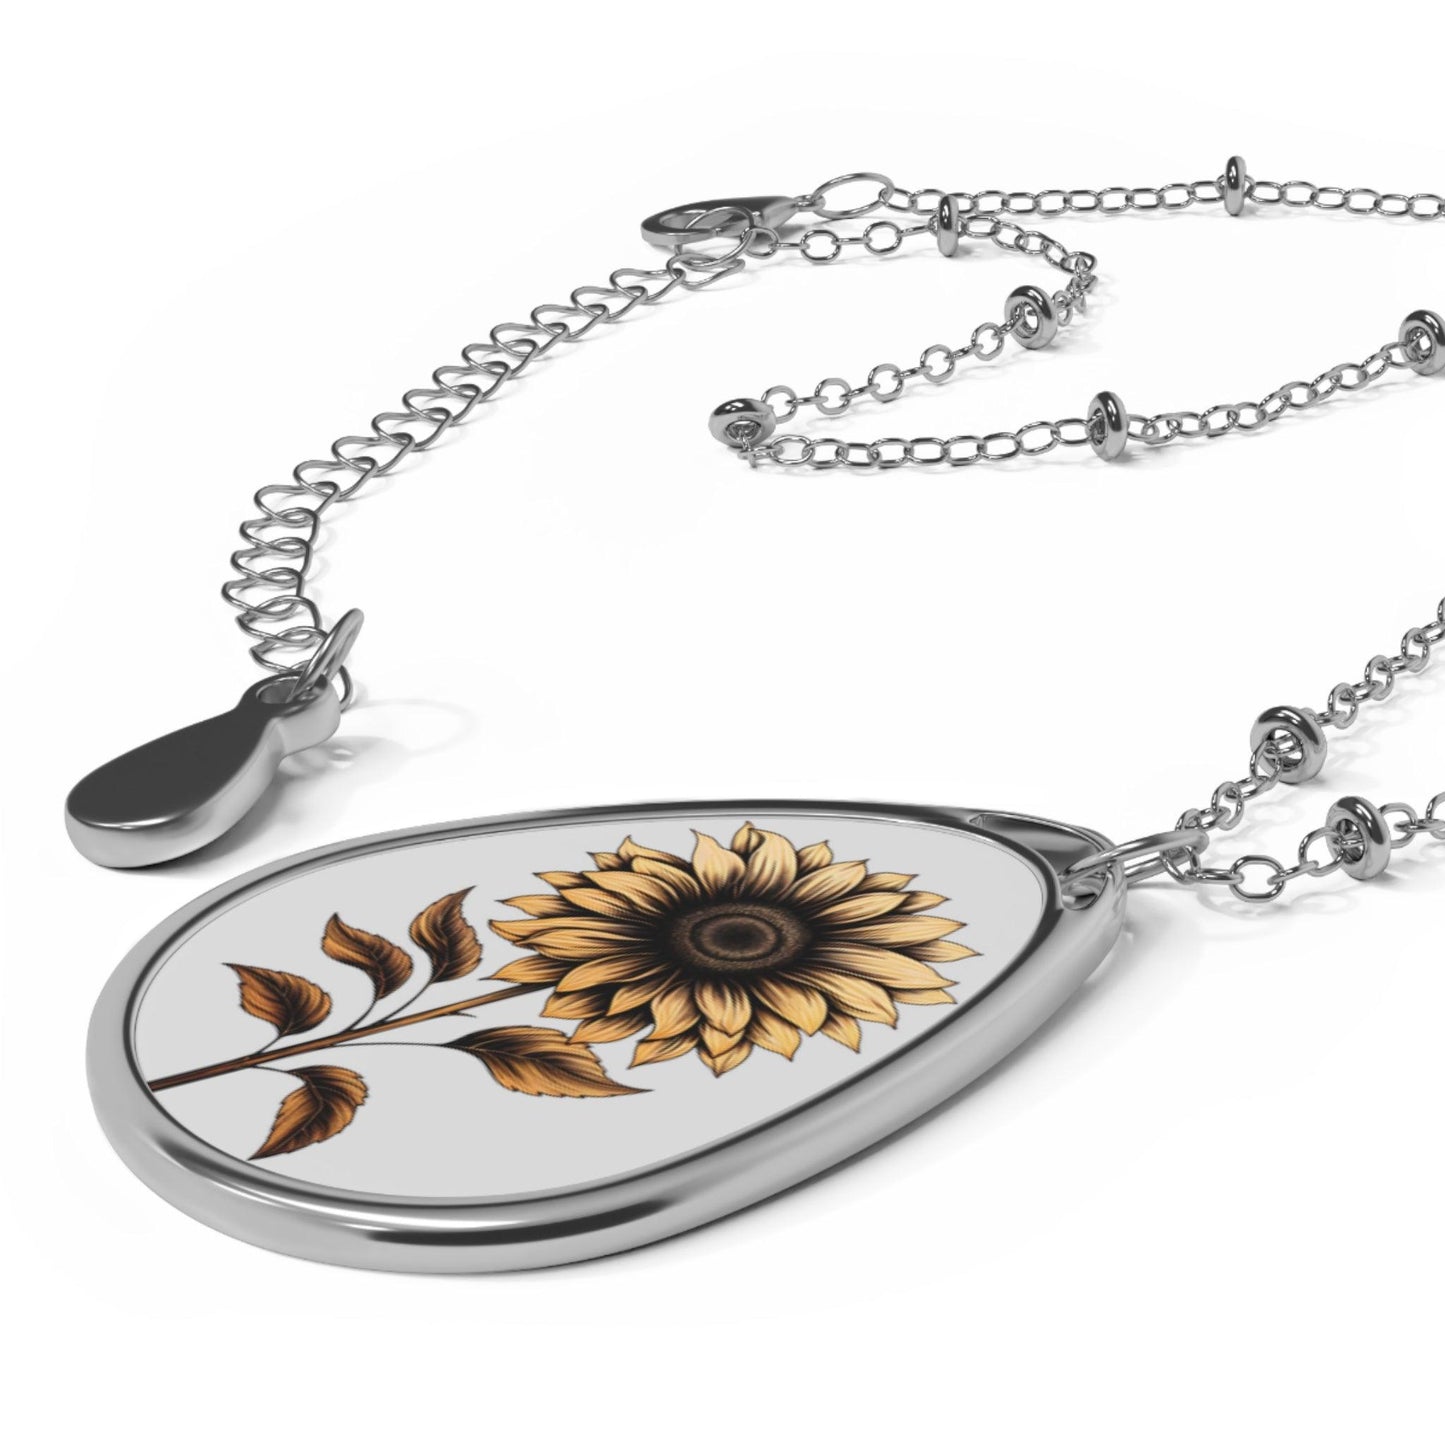 Sunflower charm in a stylish vintage necklace